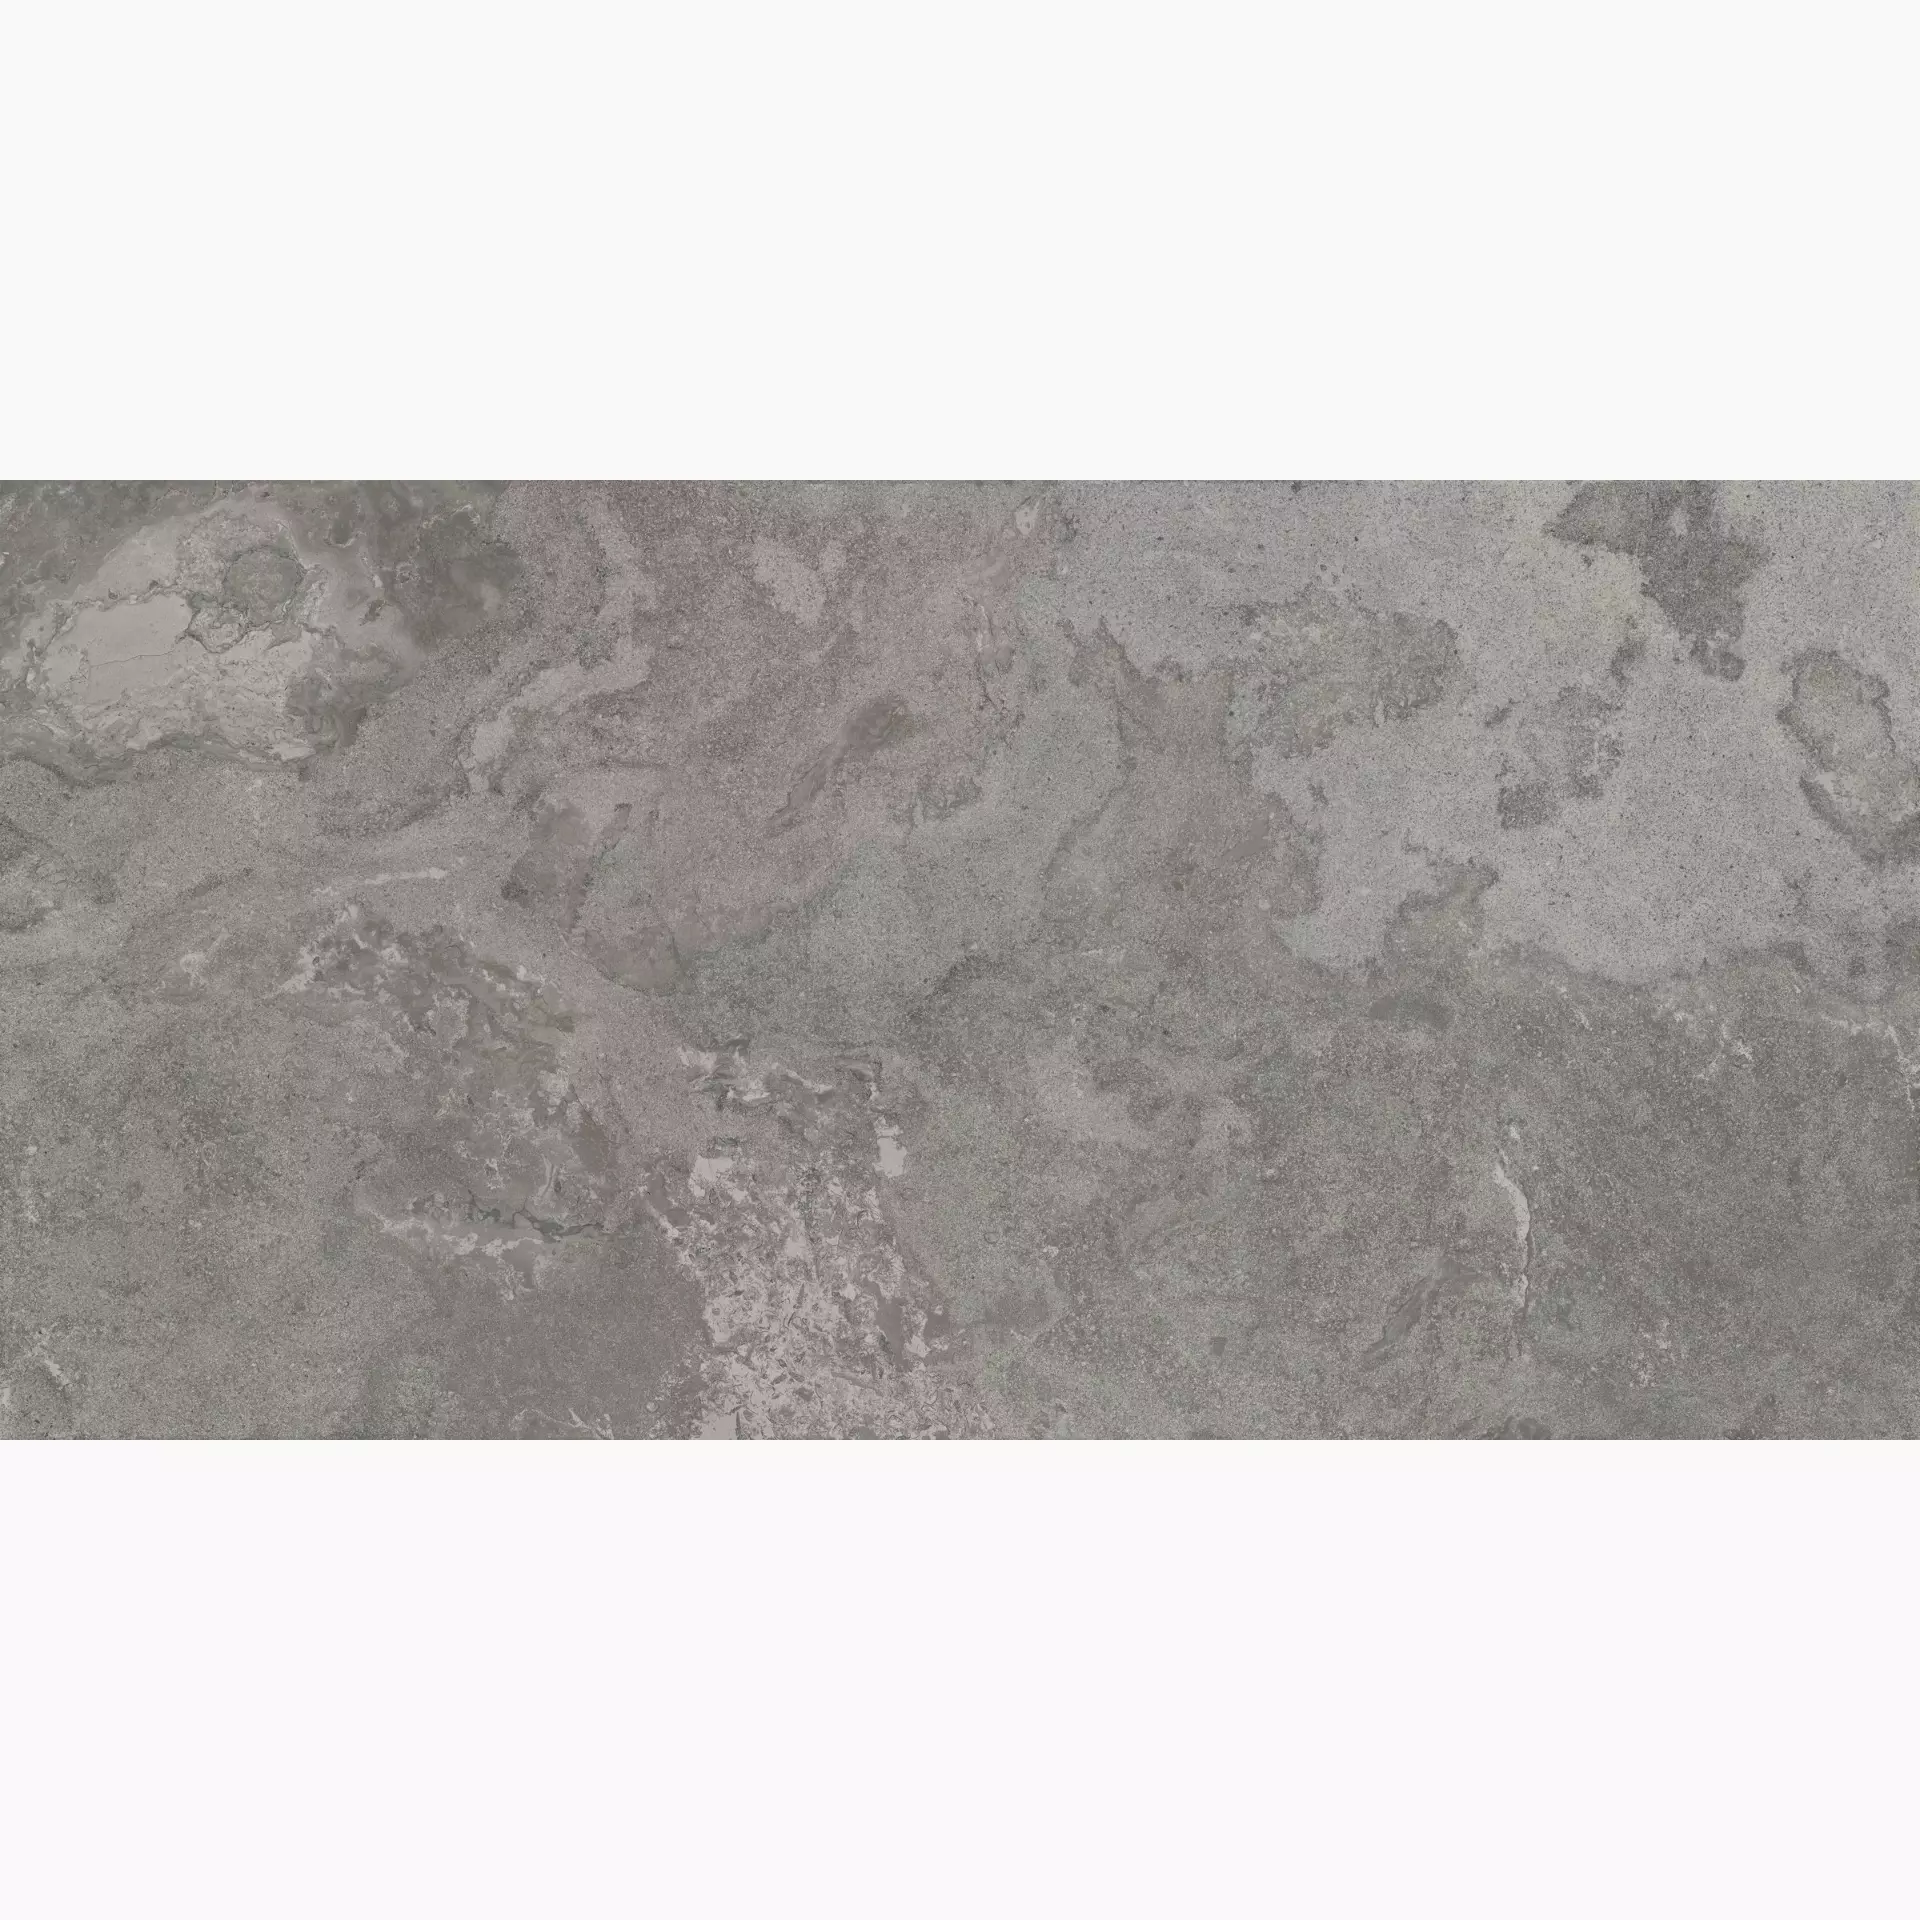 ABK Alpes Raw Lead Naturale PF60000008 60x120cm rectified 8,5mm